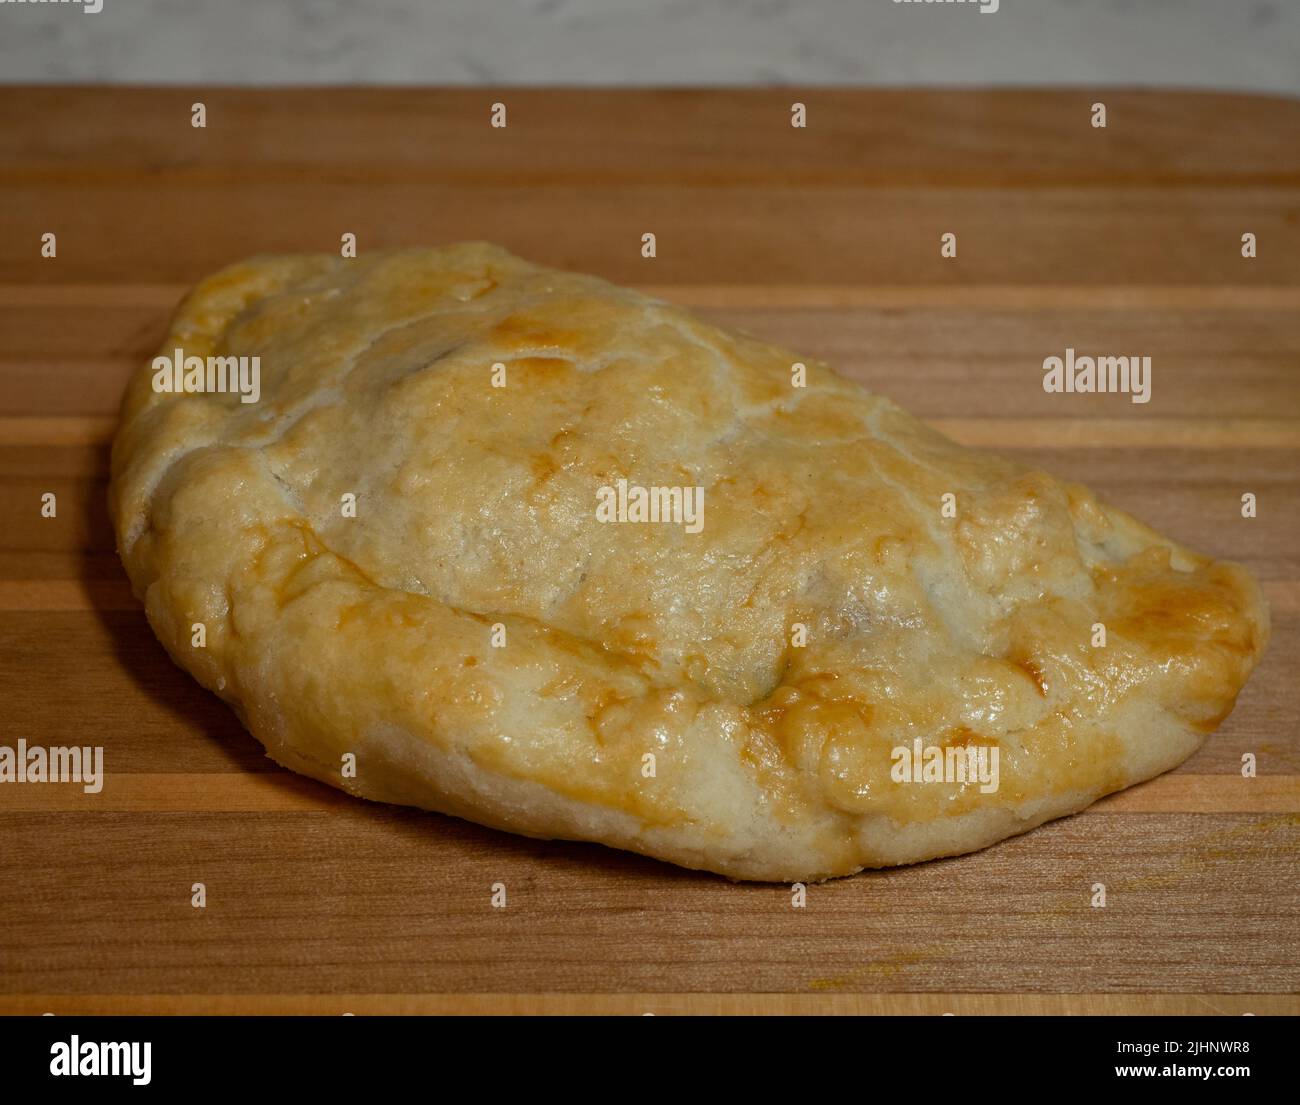 Single golden brown pasty on a wooden cutting board. Stock Photo